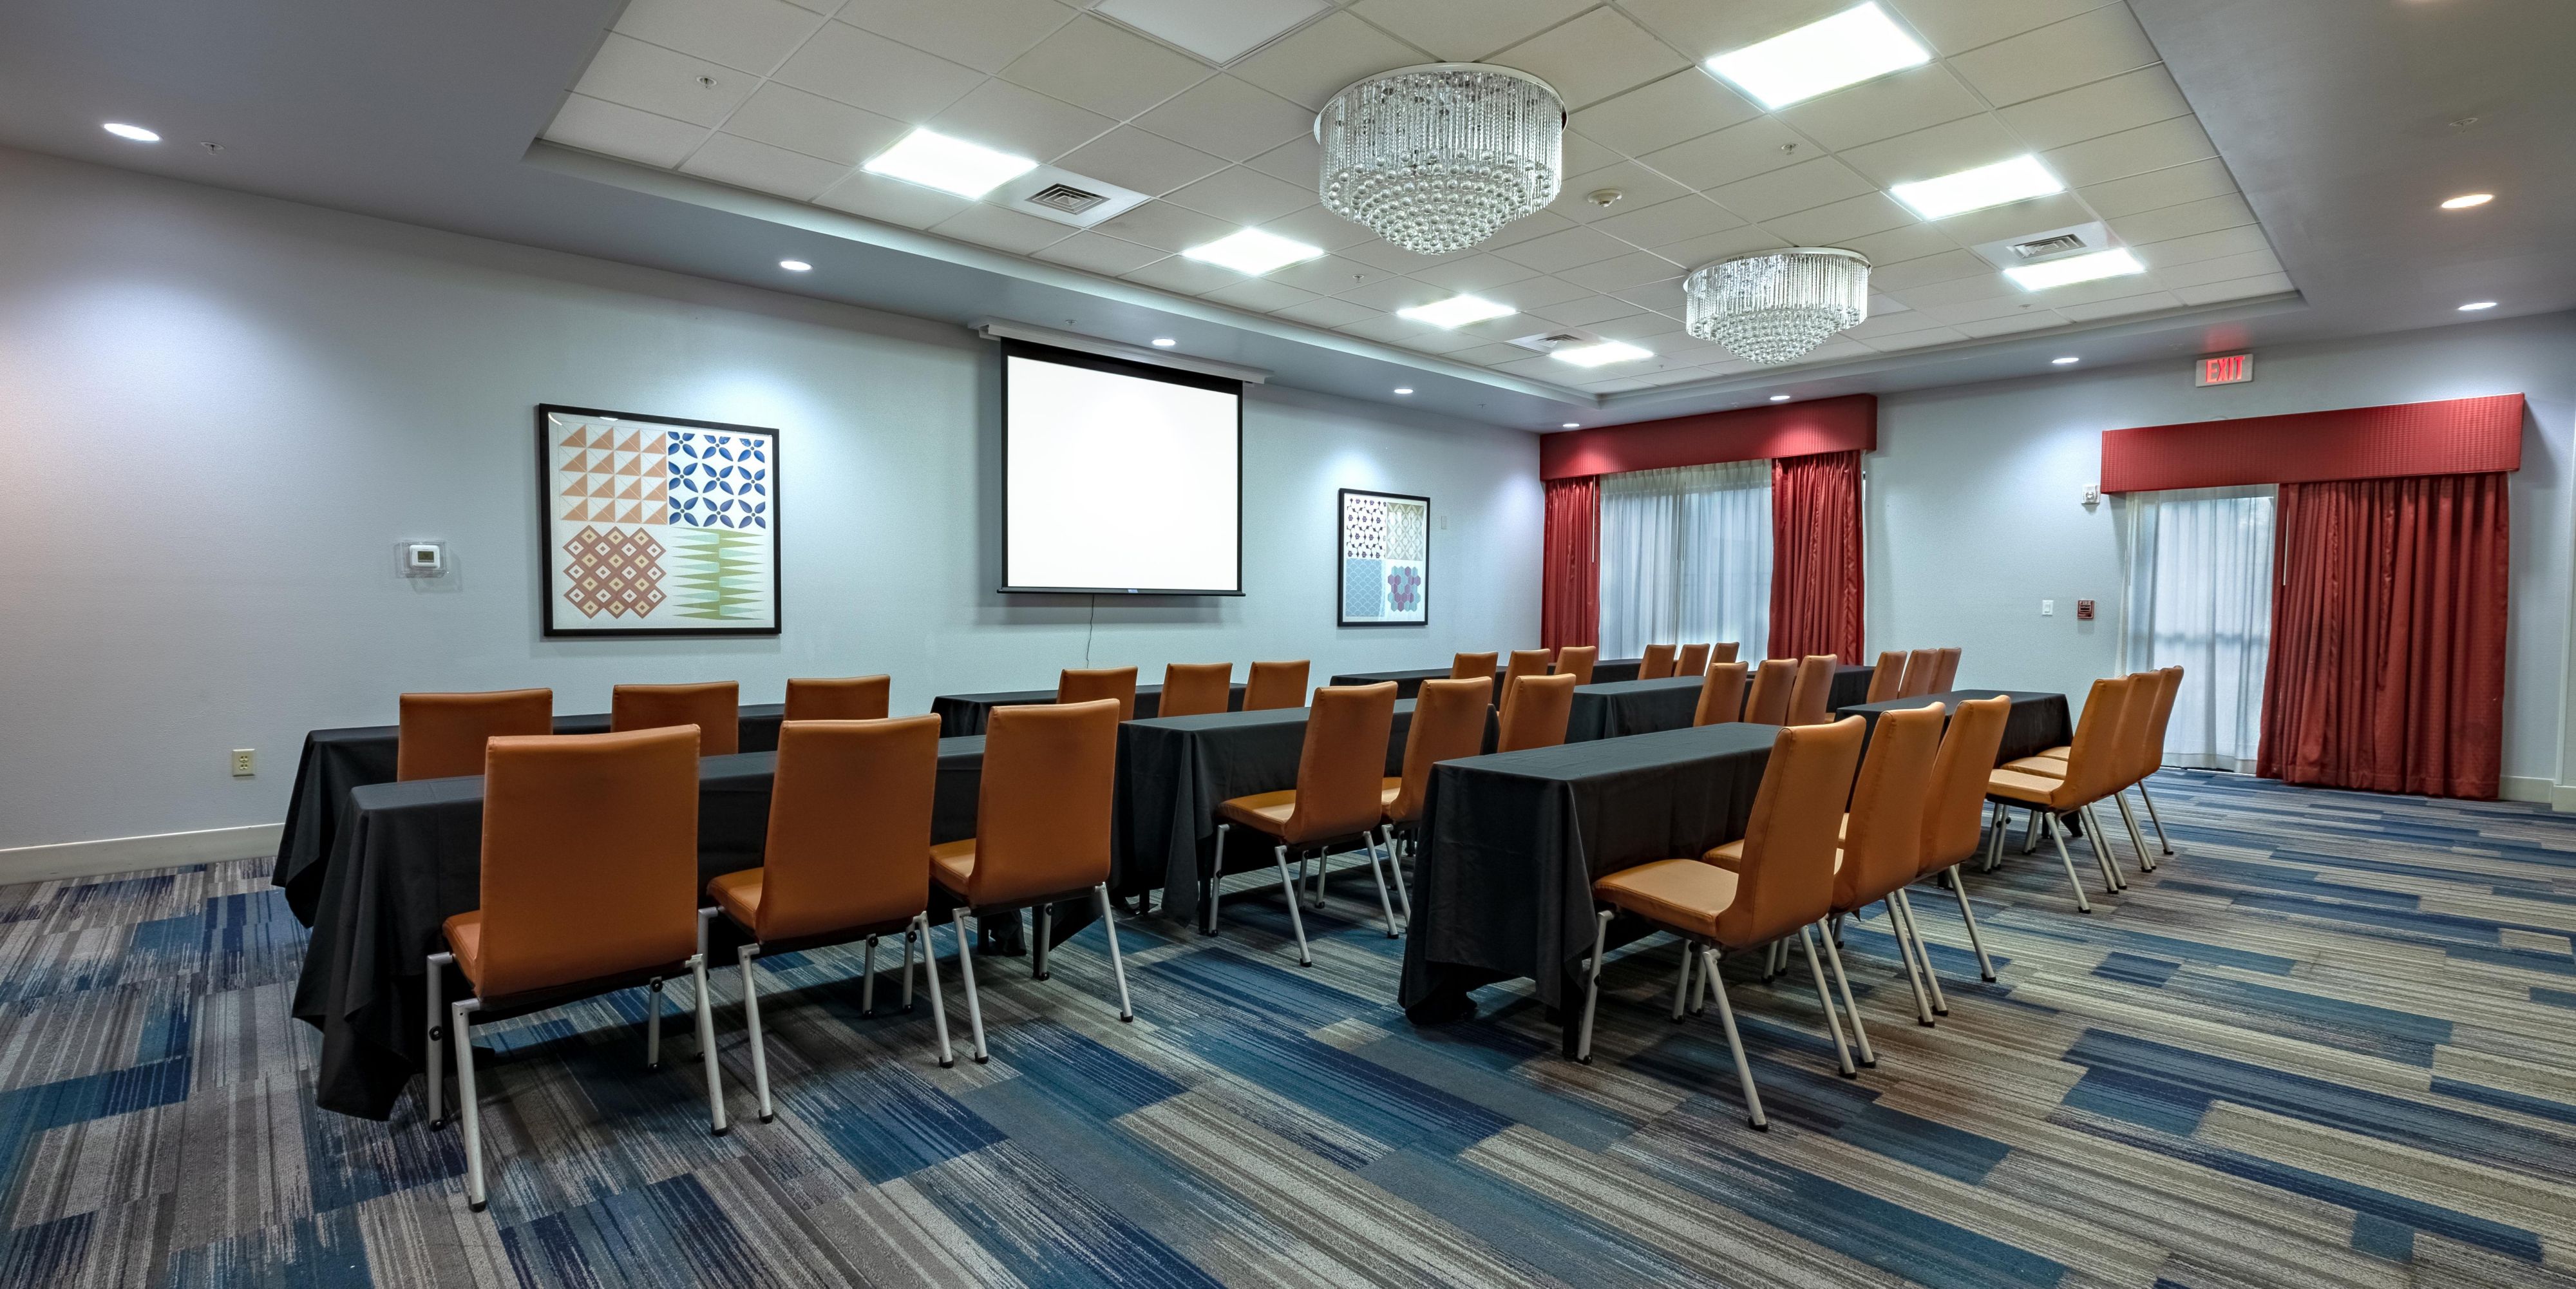 Our beautiful meeting room is versatile and can be used for all events, from business meetings to weddings. Featuring a grand double door entry with elegant chandeliers, this event space is second to none. 